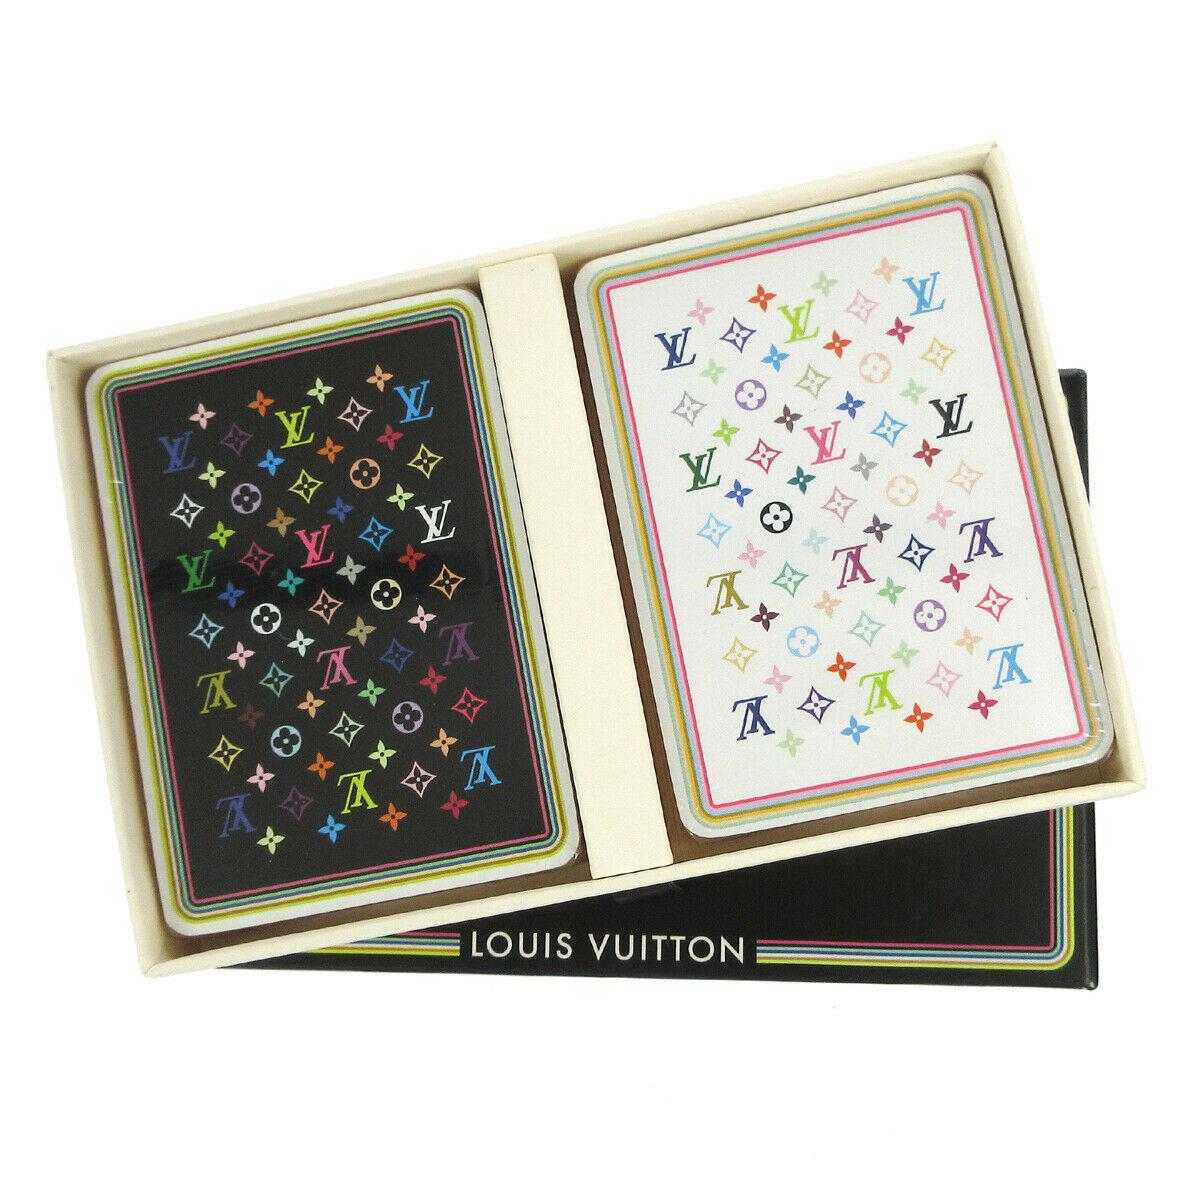 Louis Vuitton Monogram Multicolor White Black Novelty Card Deck of Cards in Box (Beige)